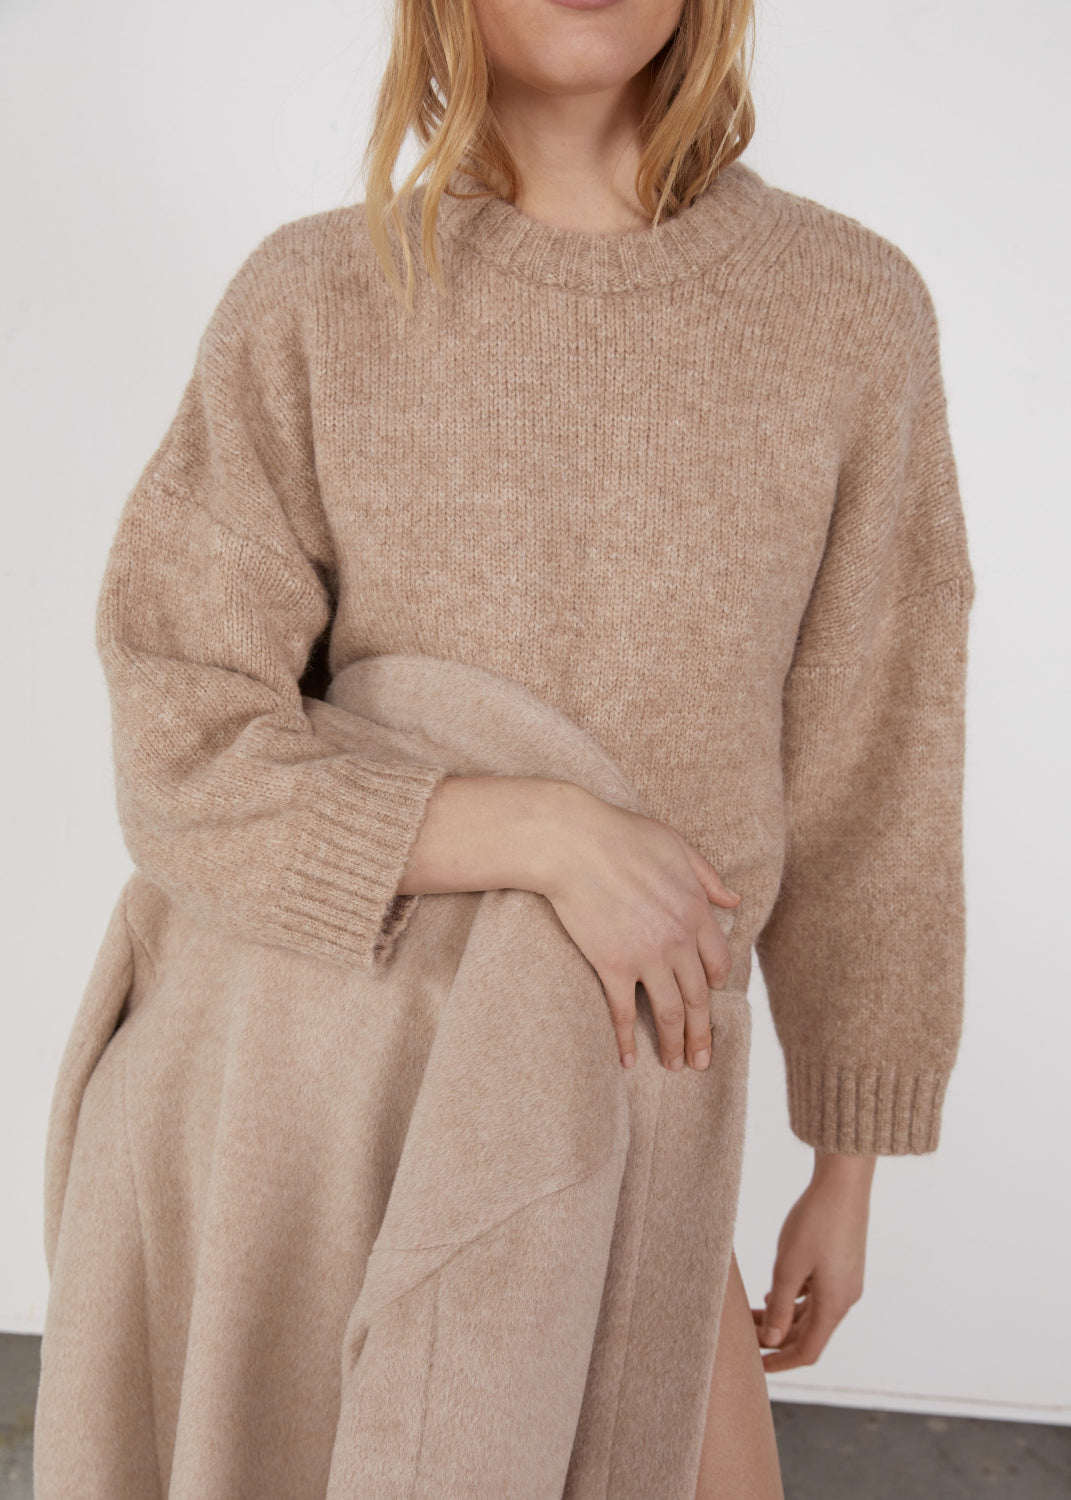 Aiayu "Mother Sweater" Pure Camel